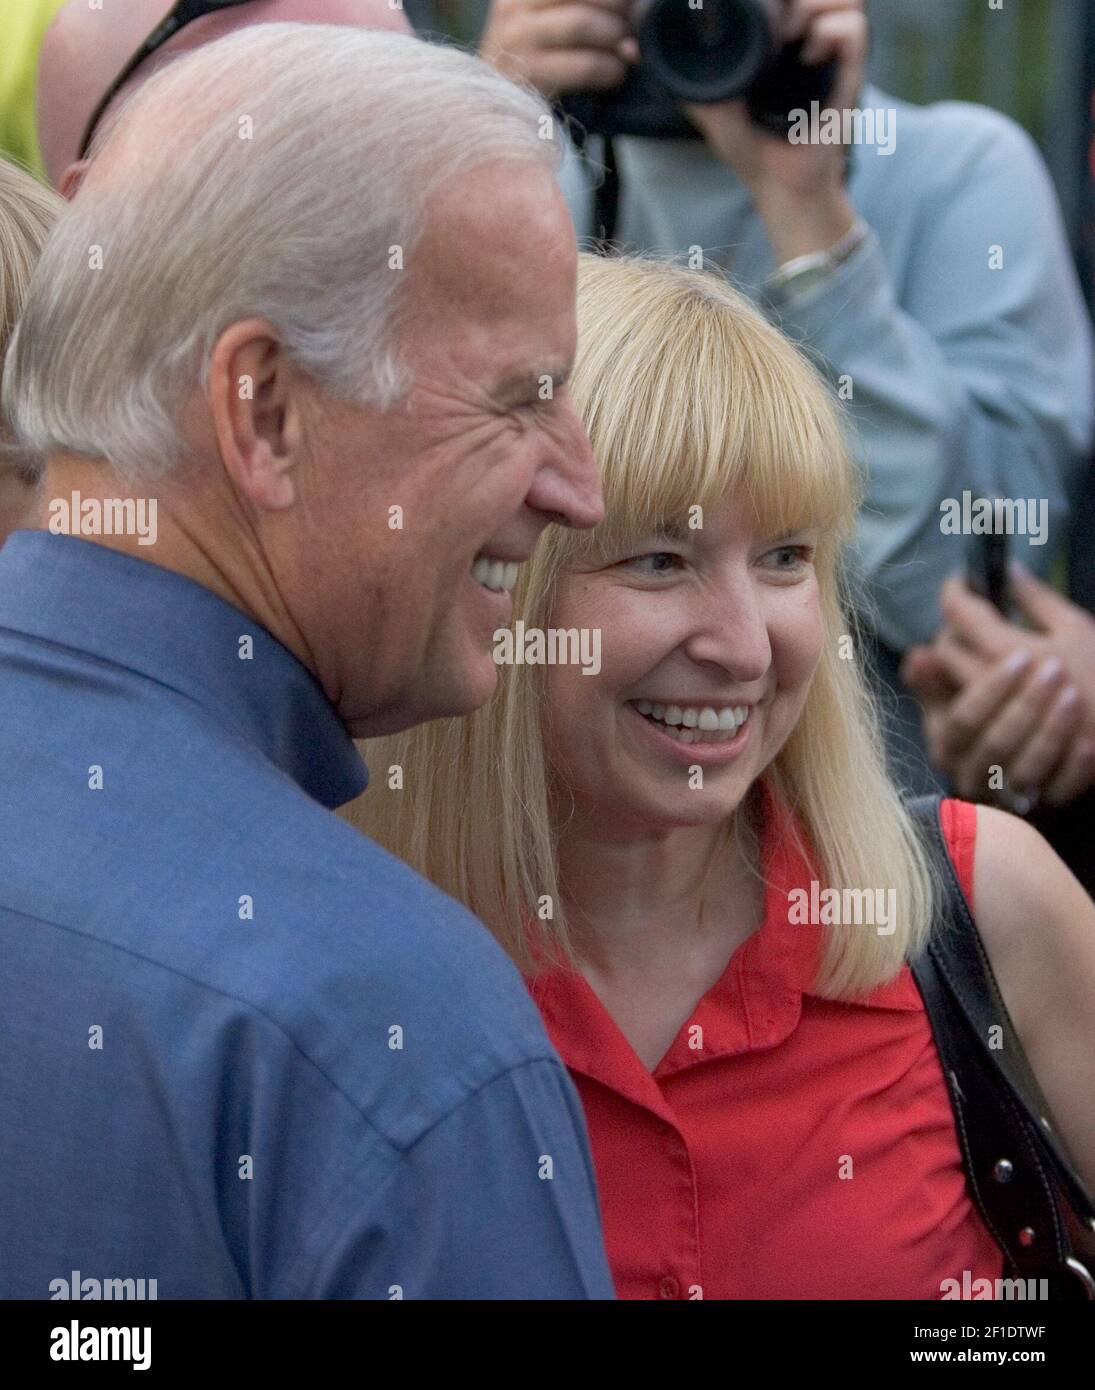 Sept 16, 2008; Middletown, PA, USA; Joe Biden poses for a snapshot with Mary Ellen Balchunis of Drexel Hill, Pa., a political science professor at LaSalle University and a local Democratic official. Mandatory Credit: William Bretzger/The News Journal via USA TODAY NETWORK/Sipa USA Stock Photo